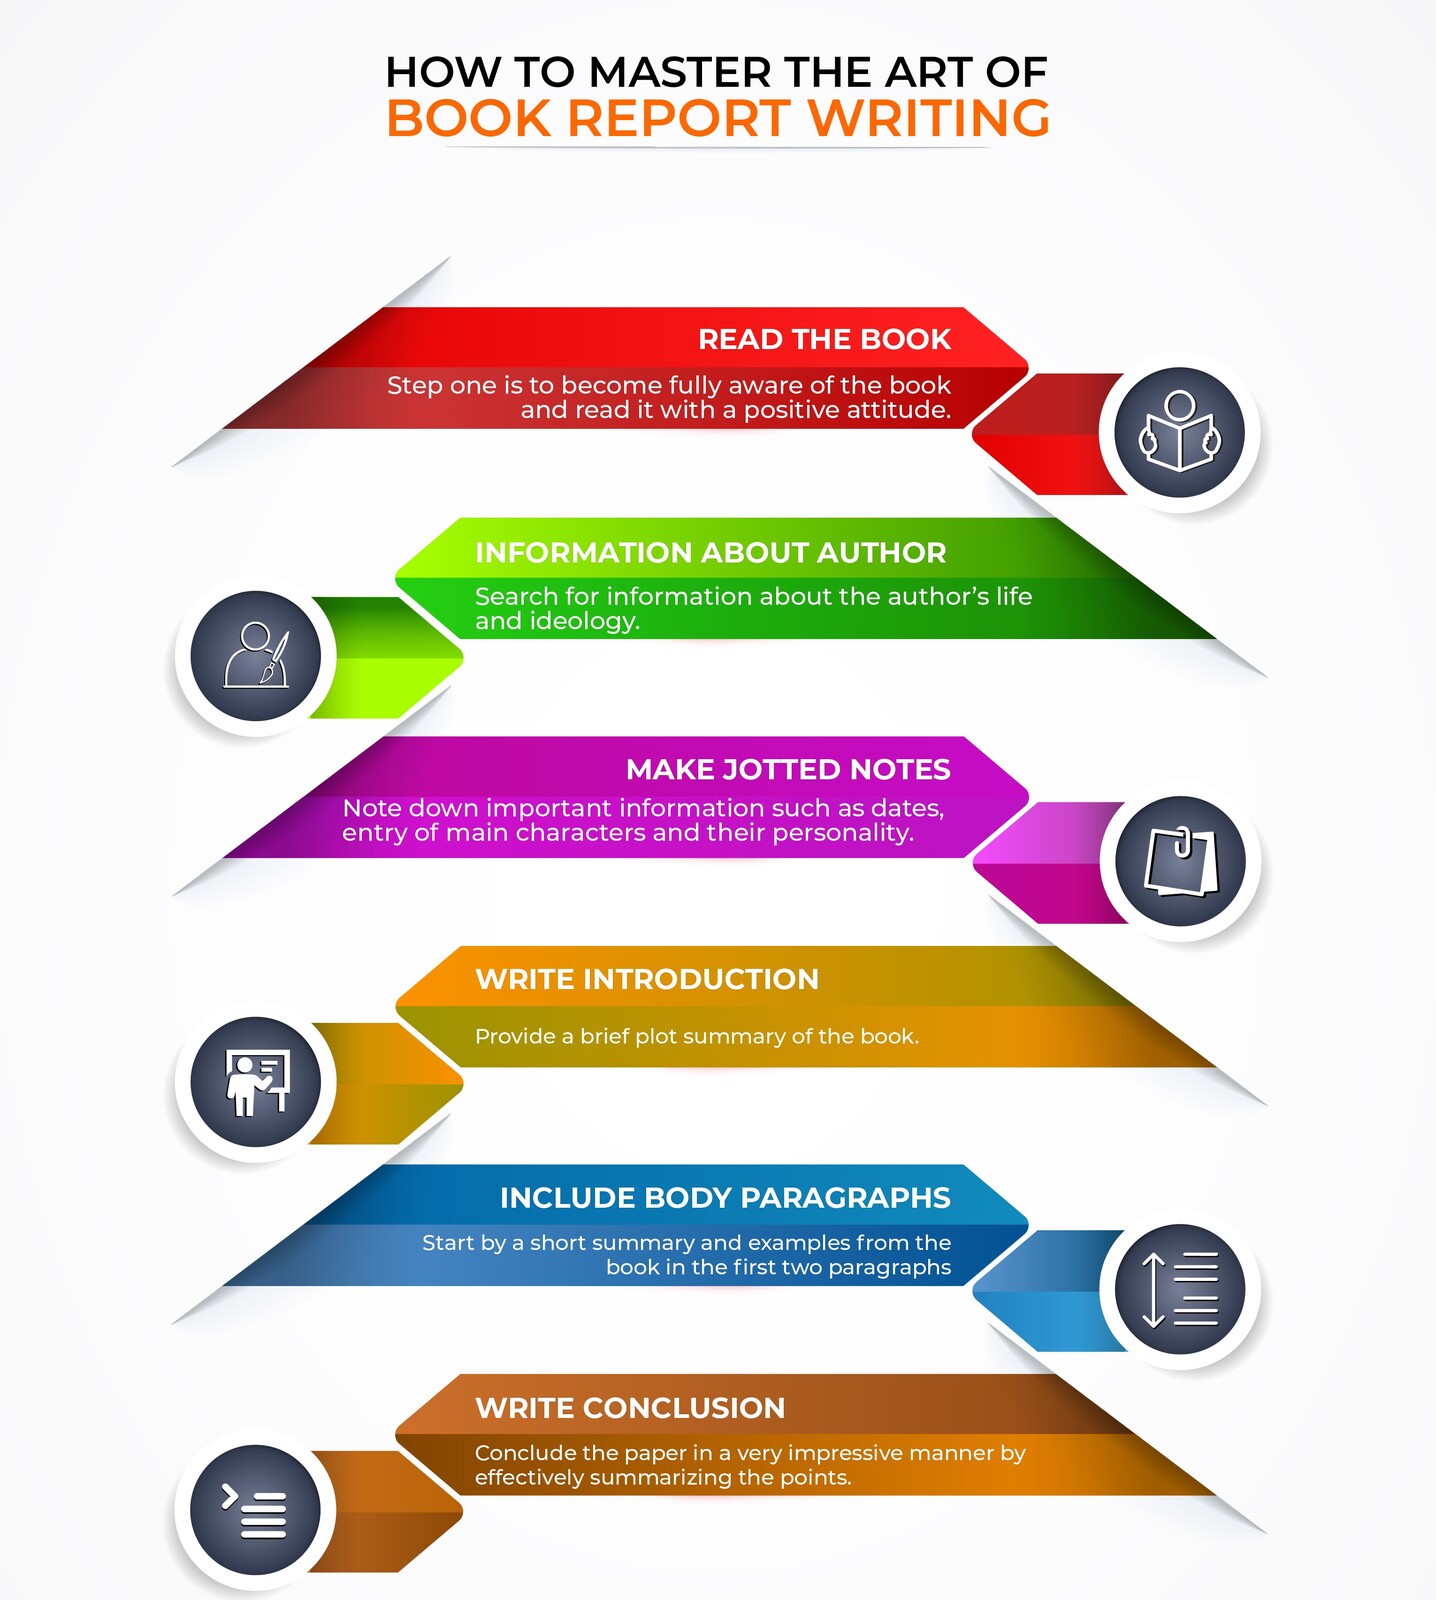 ArtStation - Book Report Writing-INFOGRAPHIC GUIDE, Natalie Strong